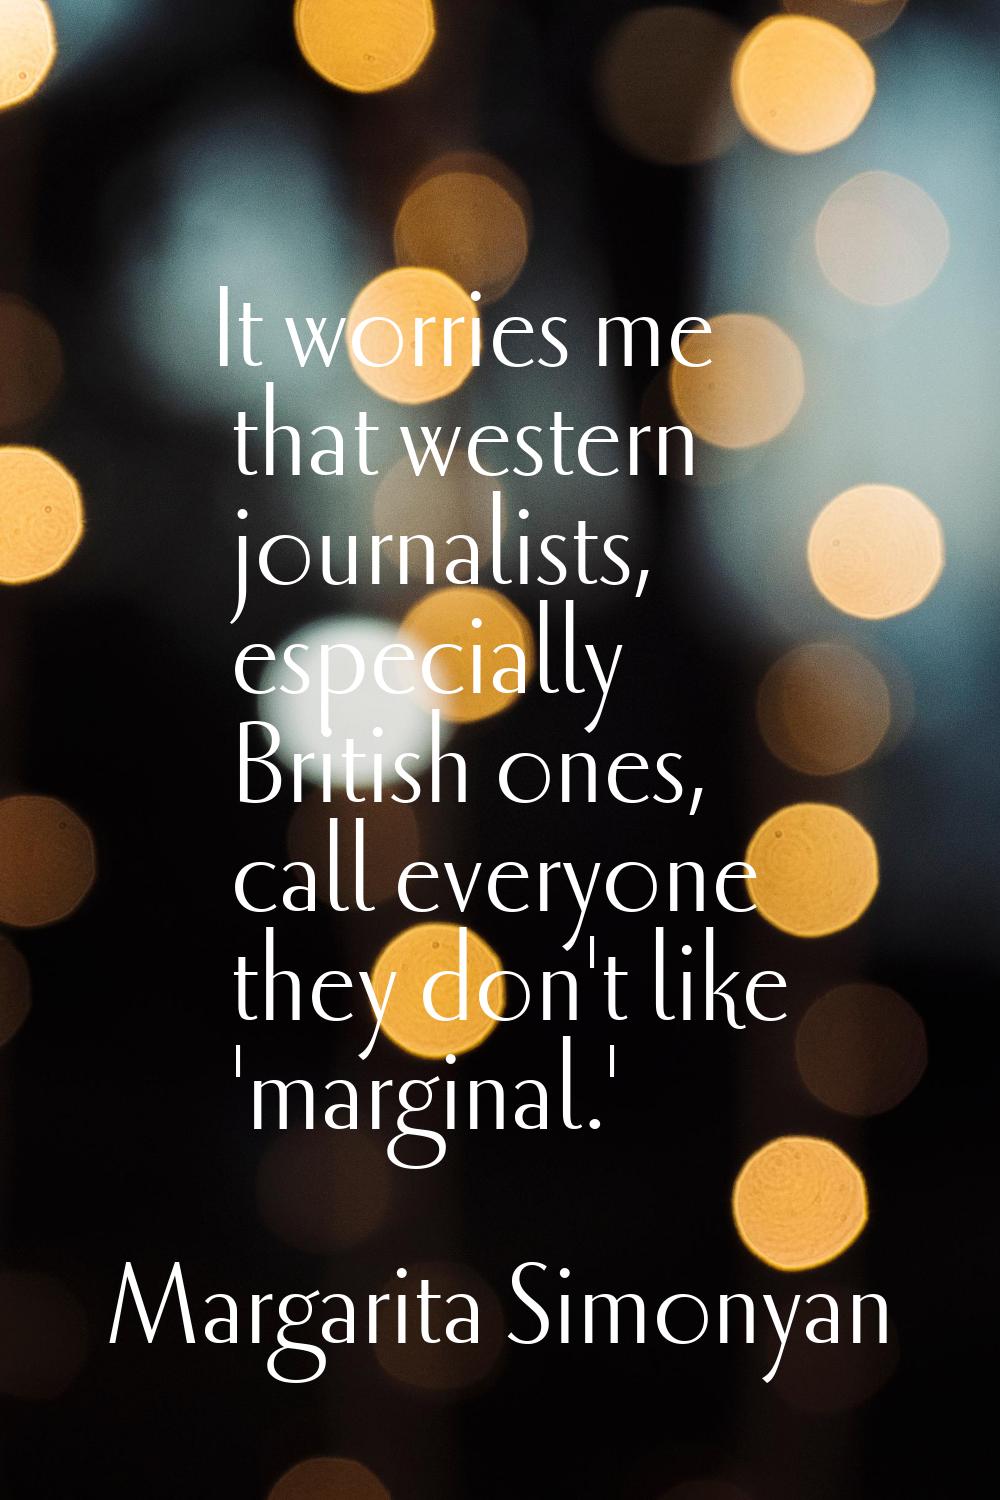 It worries me that western journalists, especially British ones, call everyone they don't like 'mar